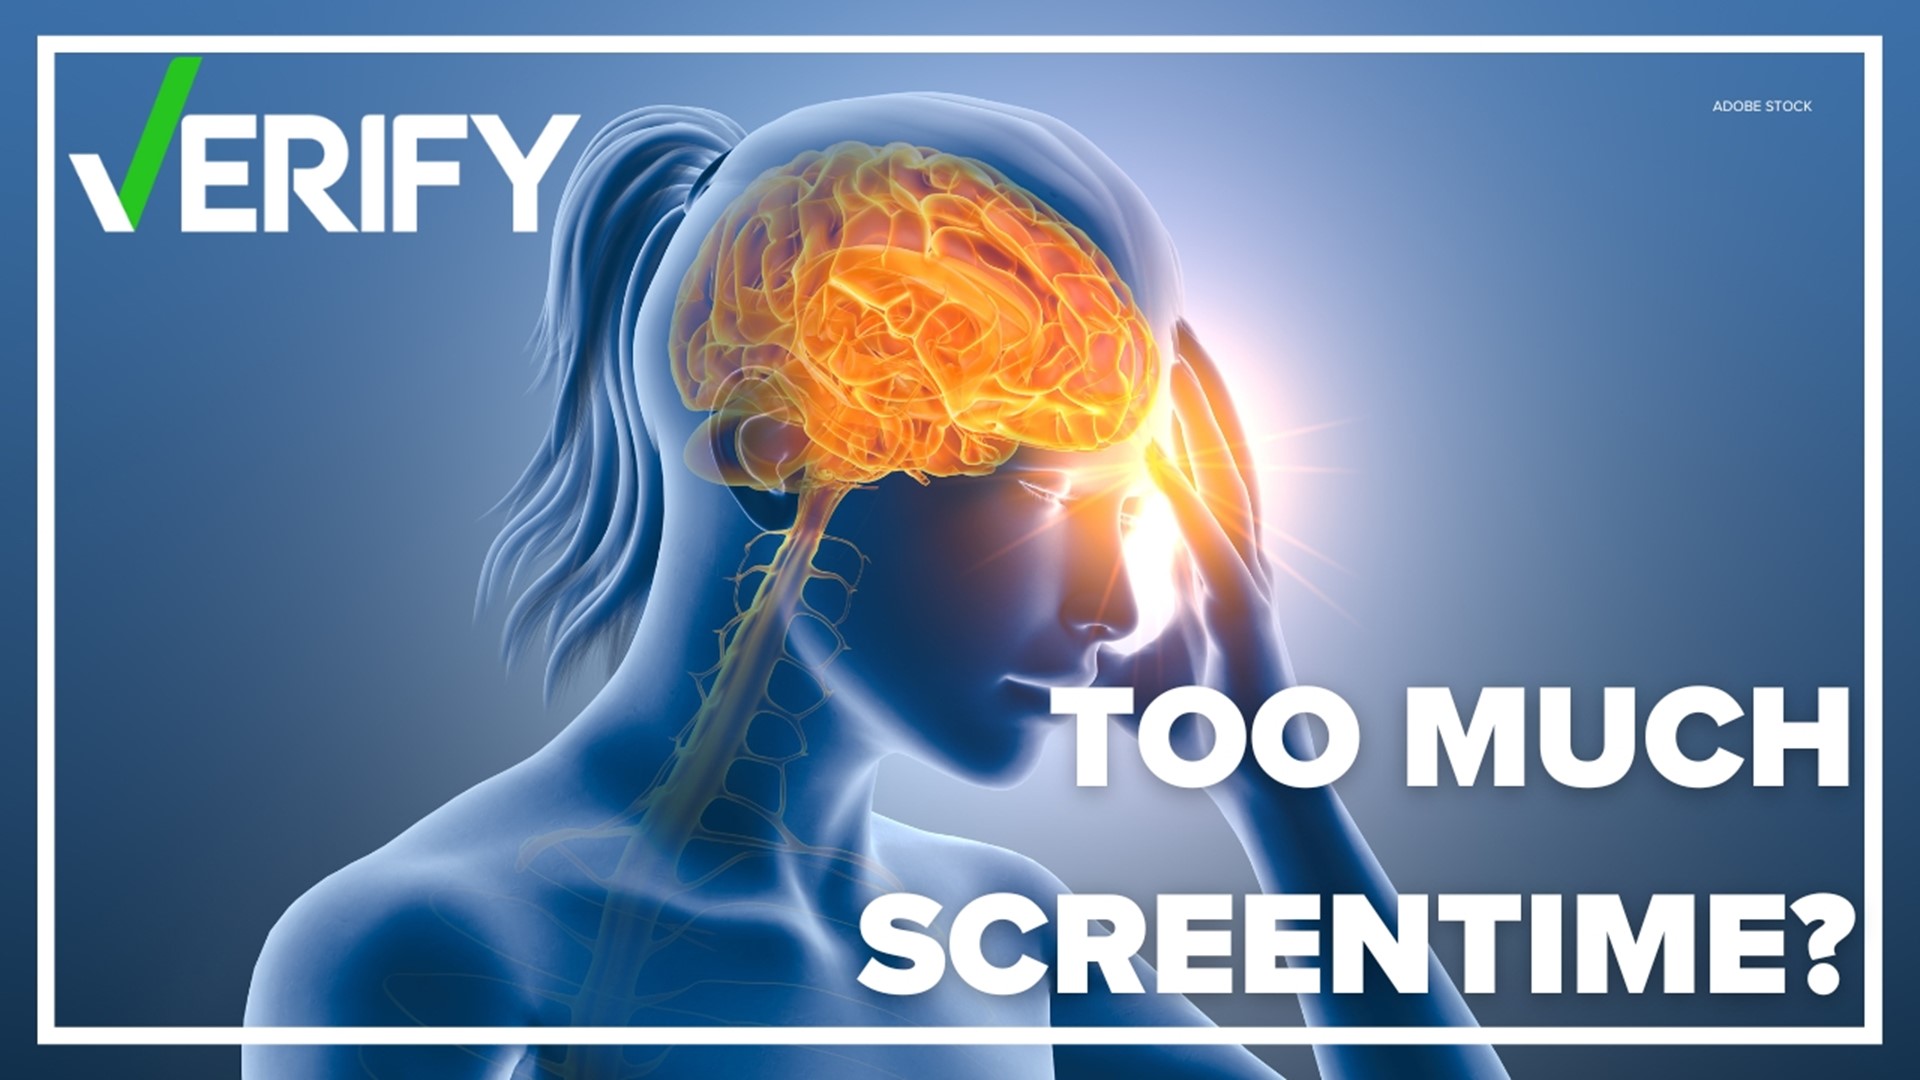 You may get weekly notifications about how much screen time you spend on your phone, but is too much screen time bad for your health?